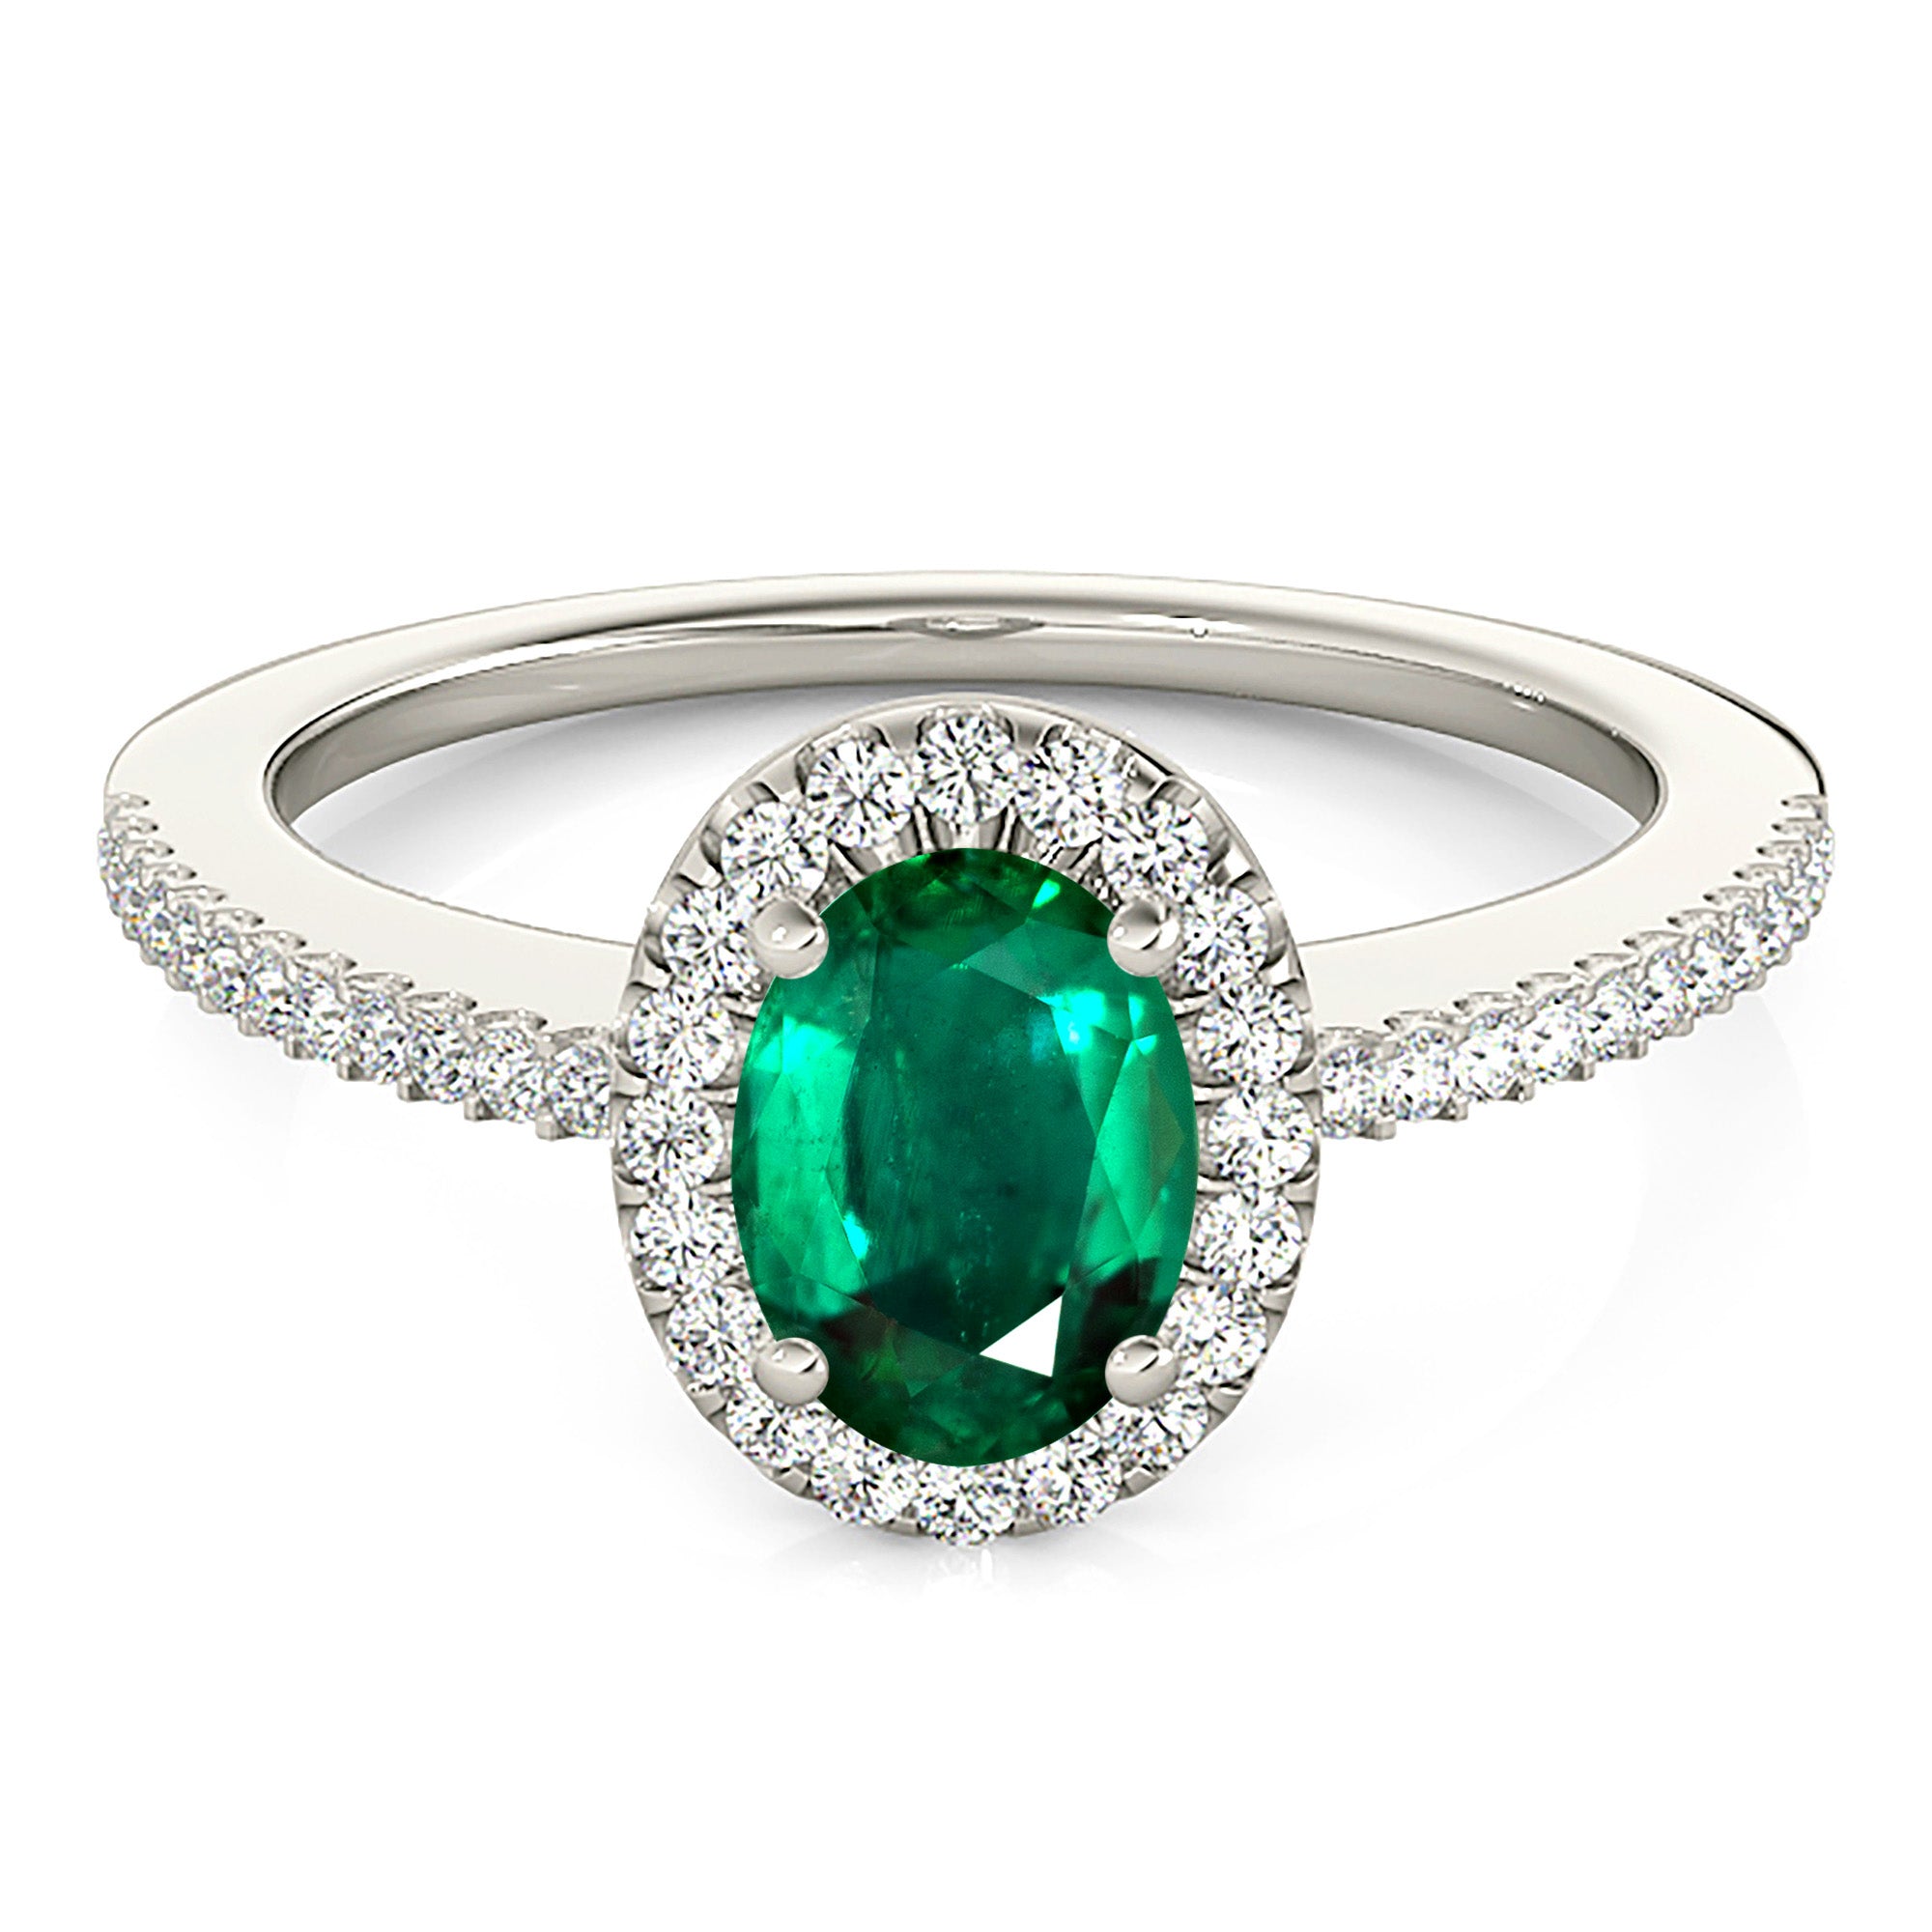 0.98 ct. Genuine Oval Emerald Ring With 0.20 ctw. Diamond Halo and Diamond Thin Shank-in 14K/18K White, Yellow, Rose Gold and Platinum - Christmas Jewelry Gift -VIRABYANI